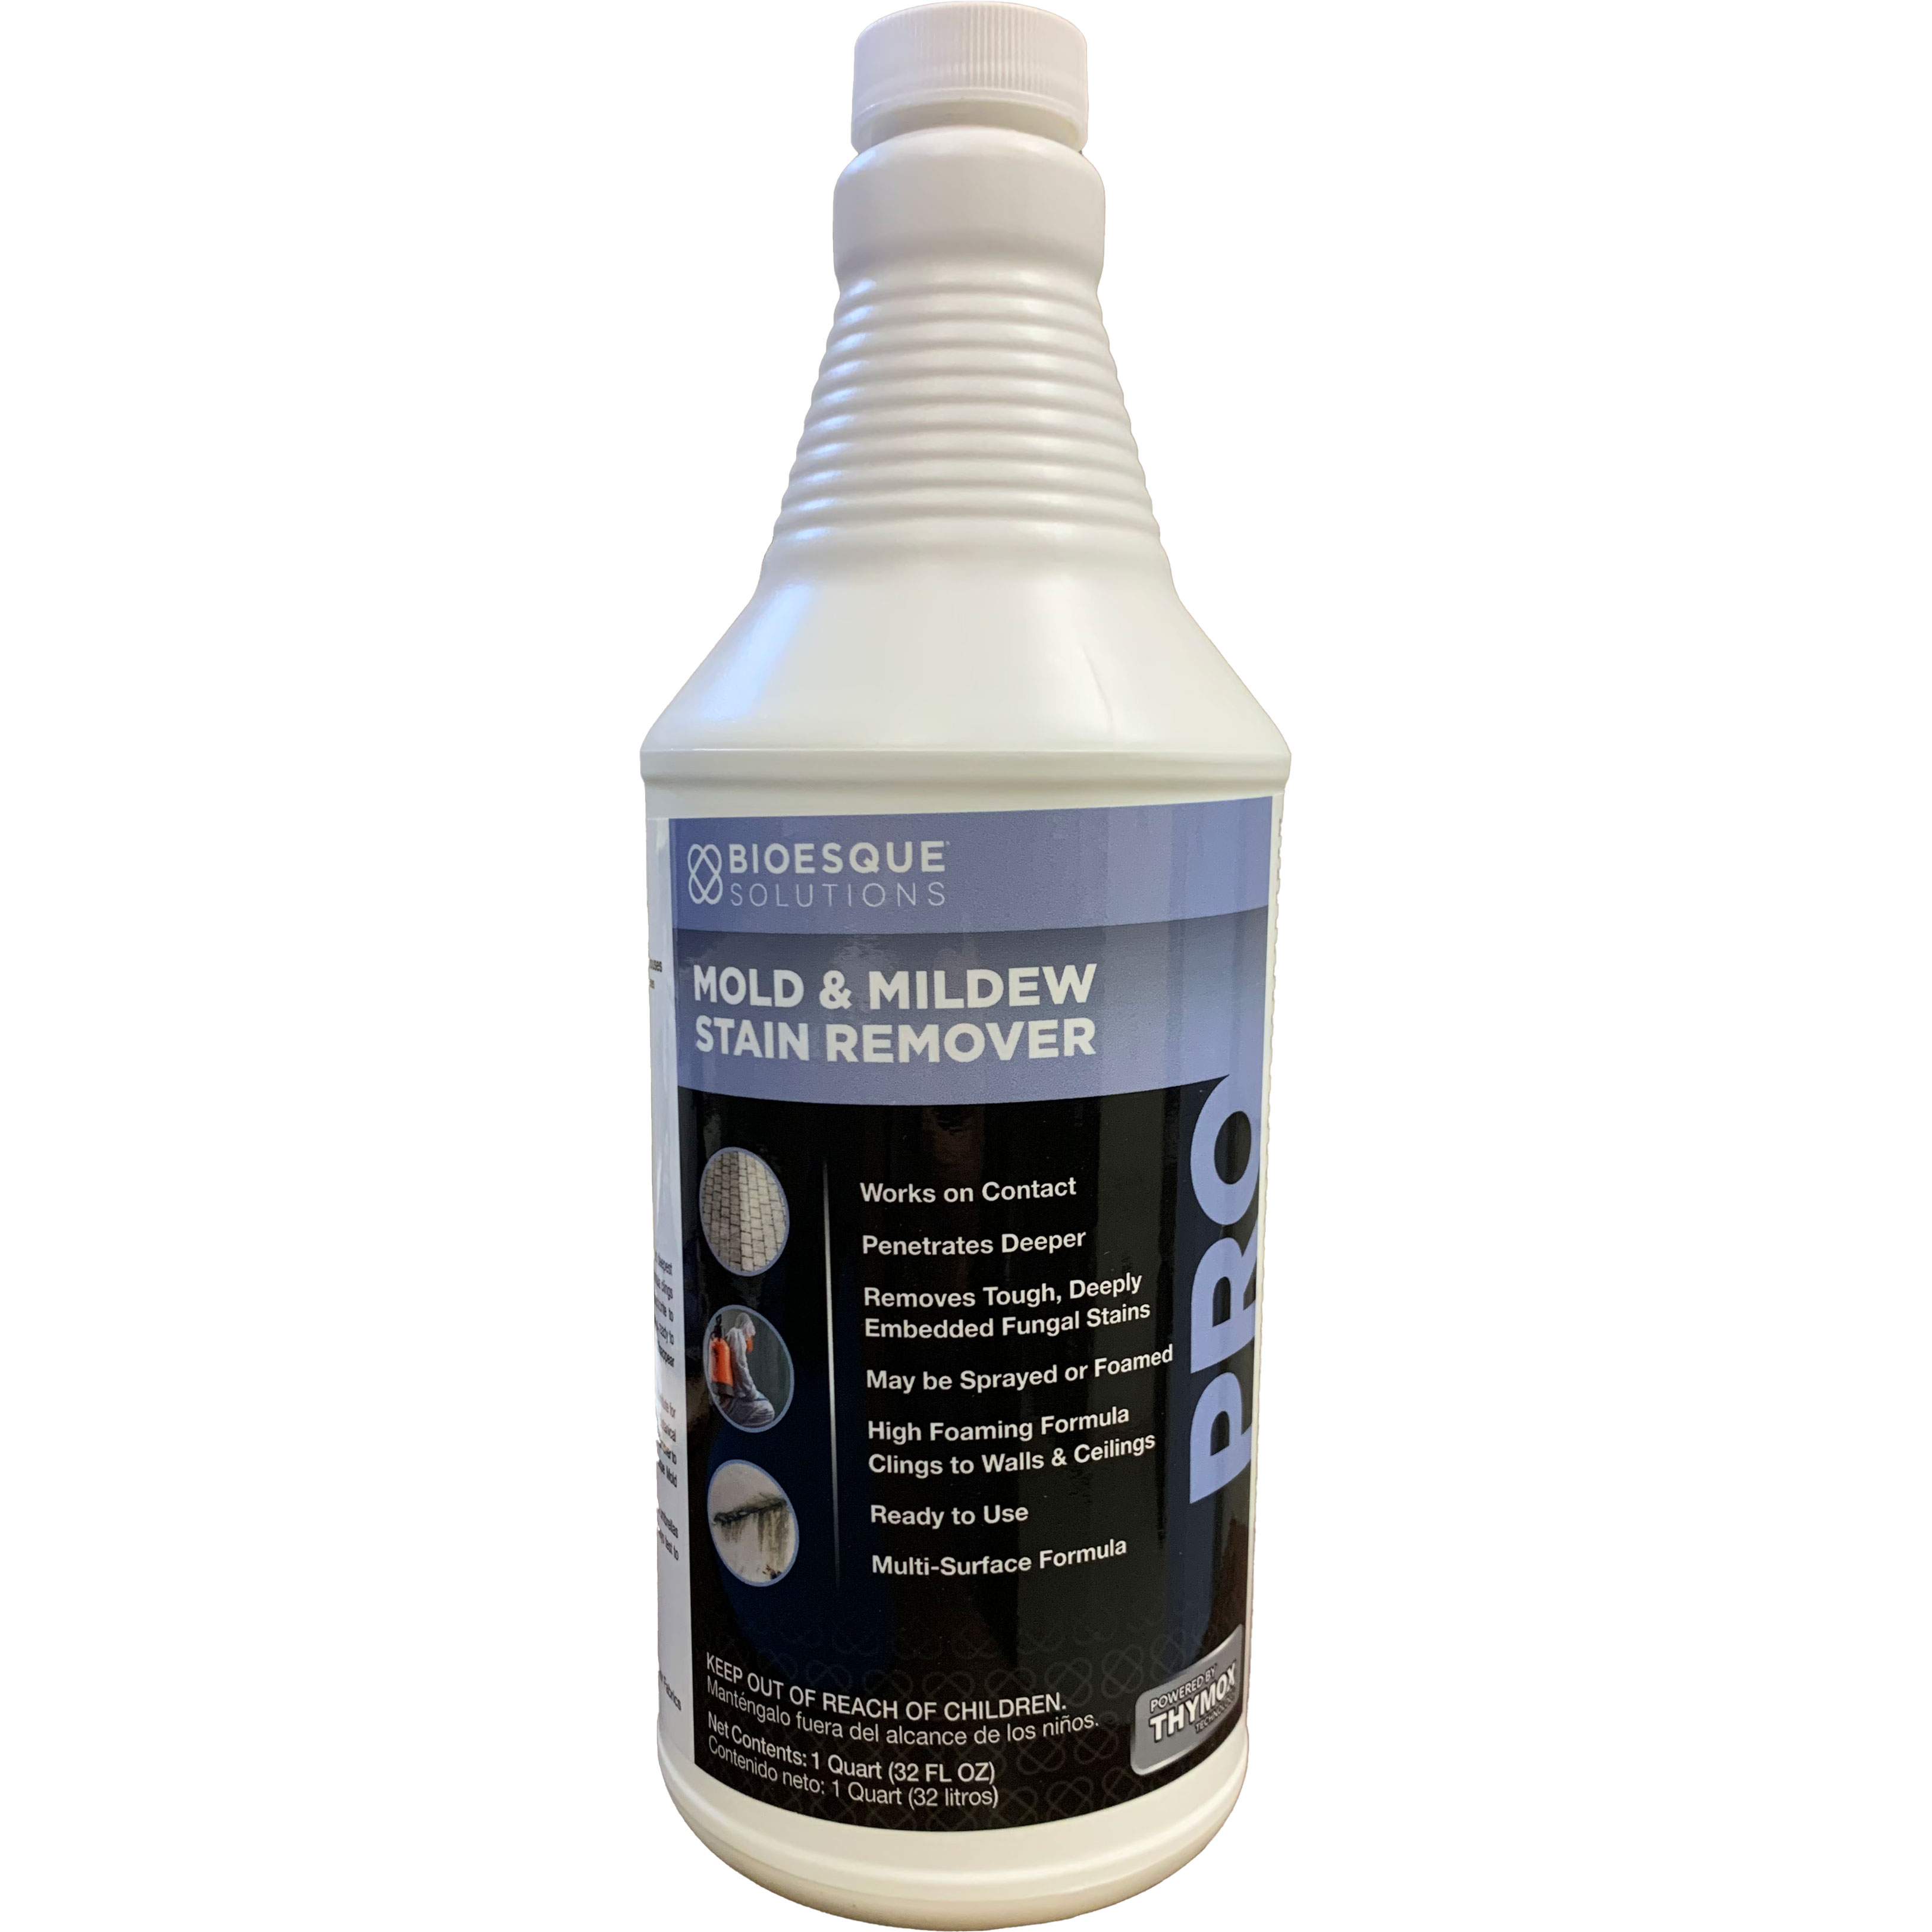 Bioesque Mold & Mildew Stain Remover, 1 Quart Spray Bottle - Click Image to Close